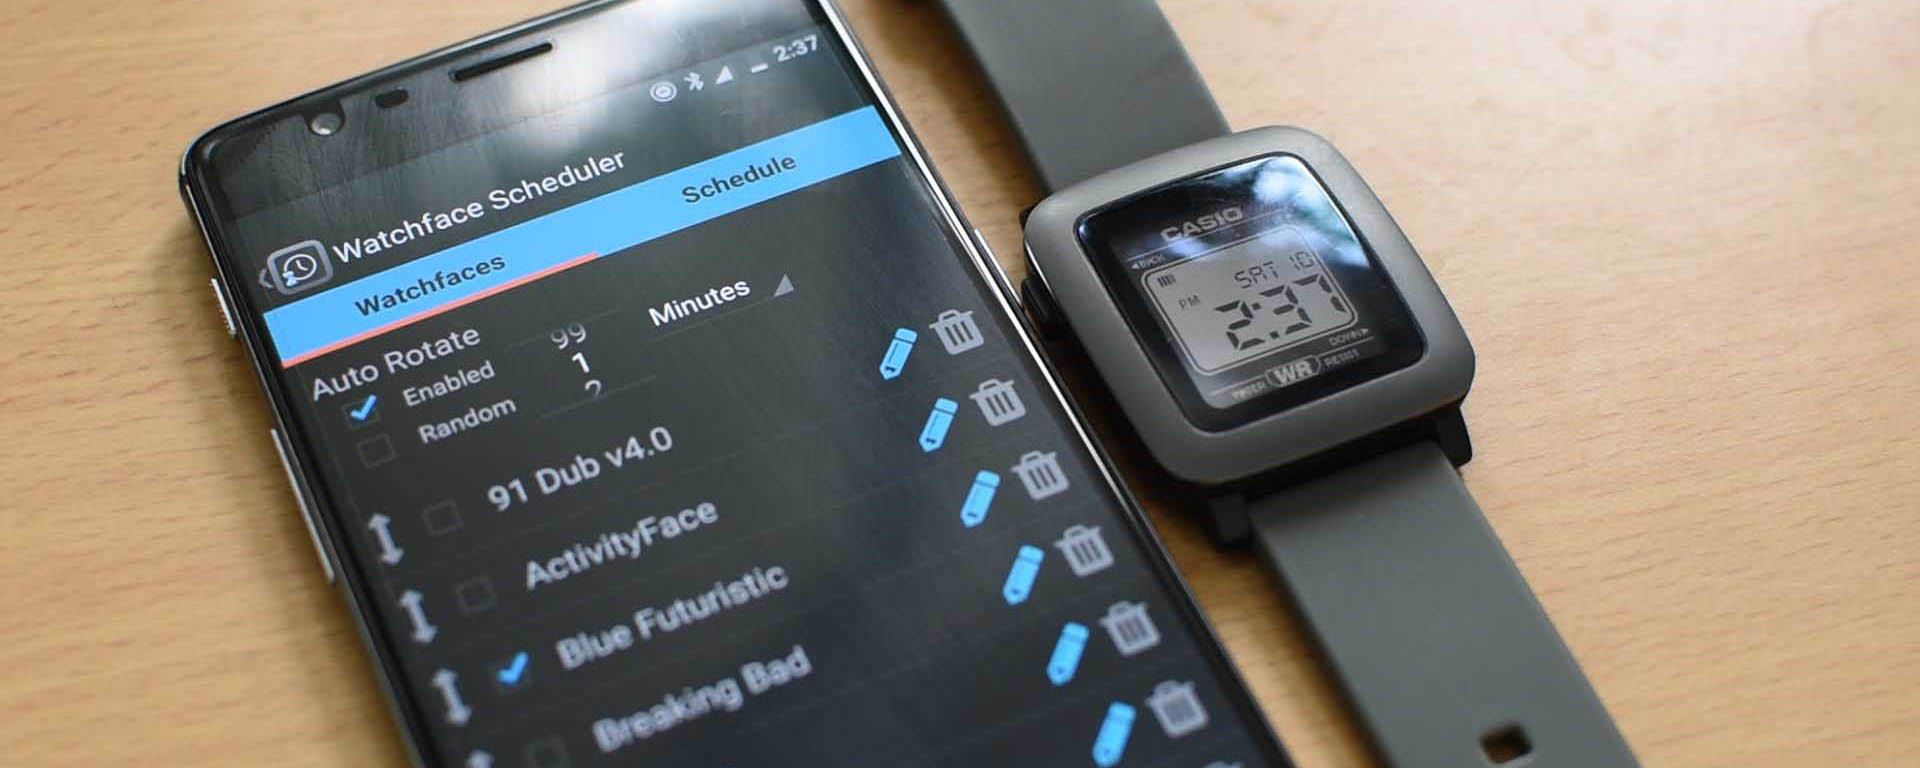 CASIO - Switch between watchfaces automatically